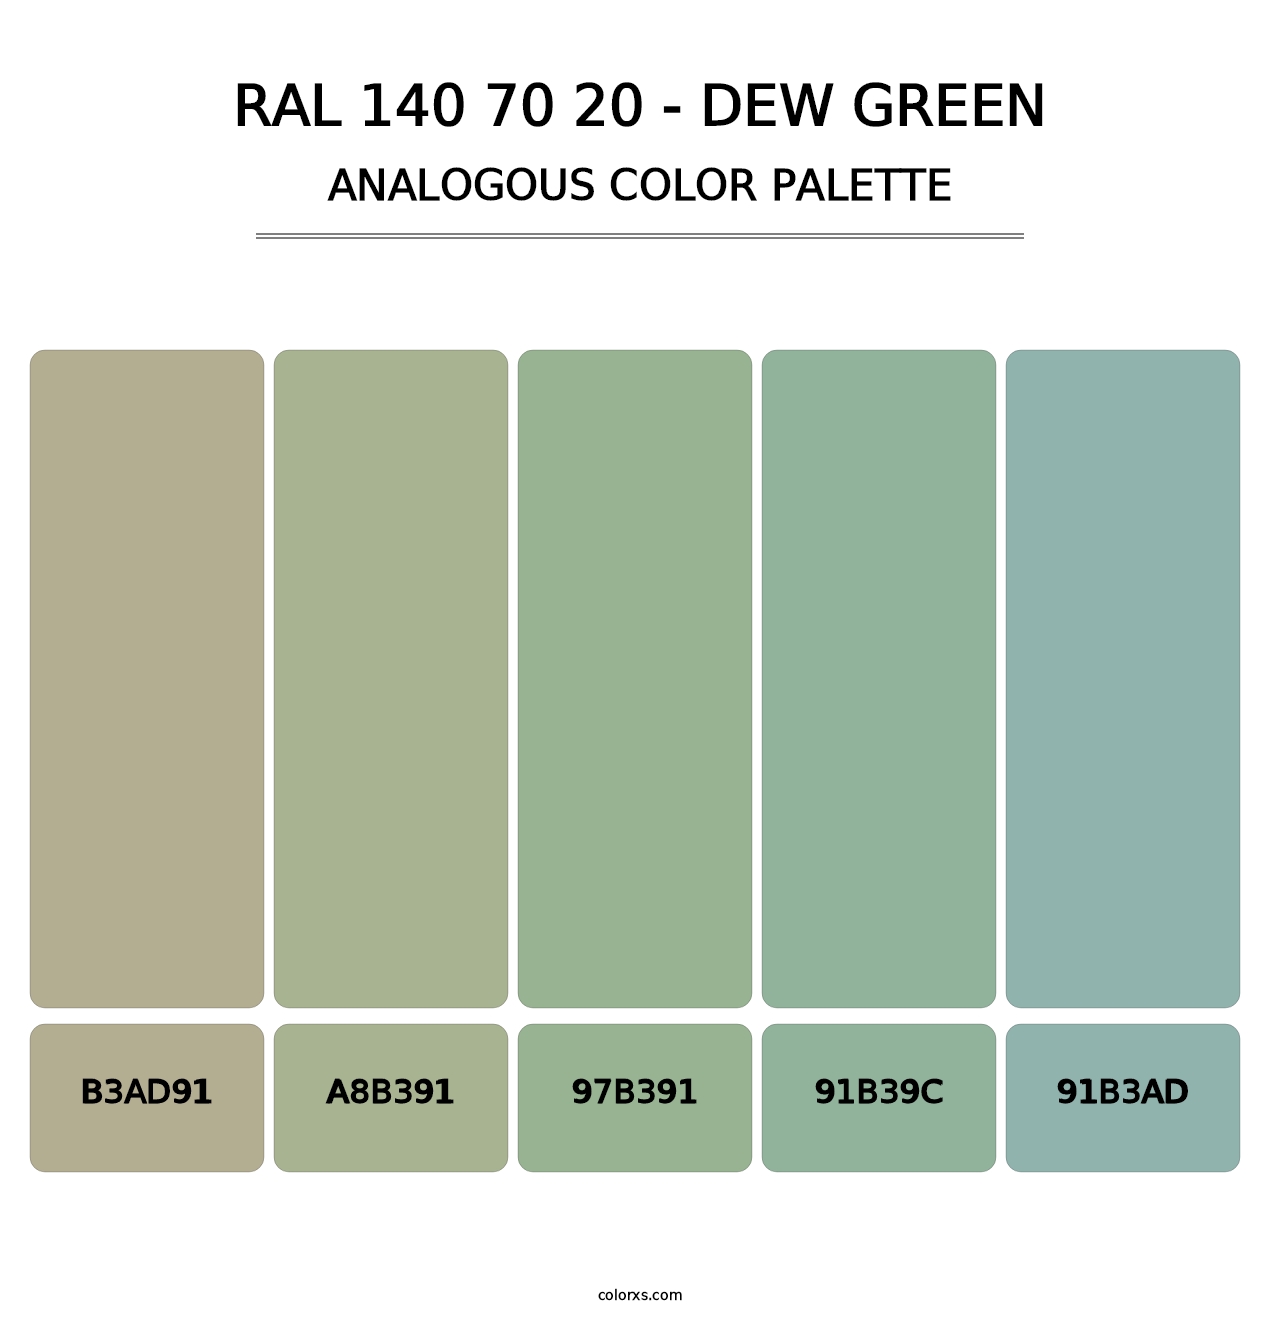 RAL 140 70 20 - Dew Green - Analogous Color Palette